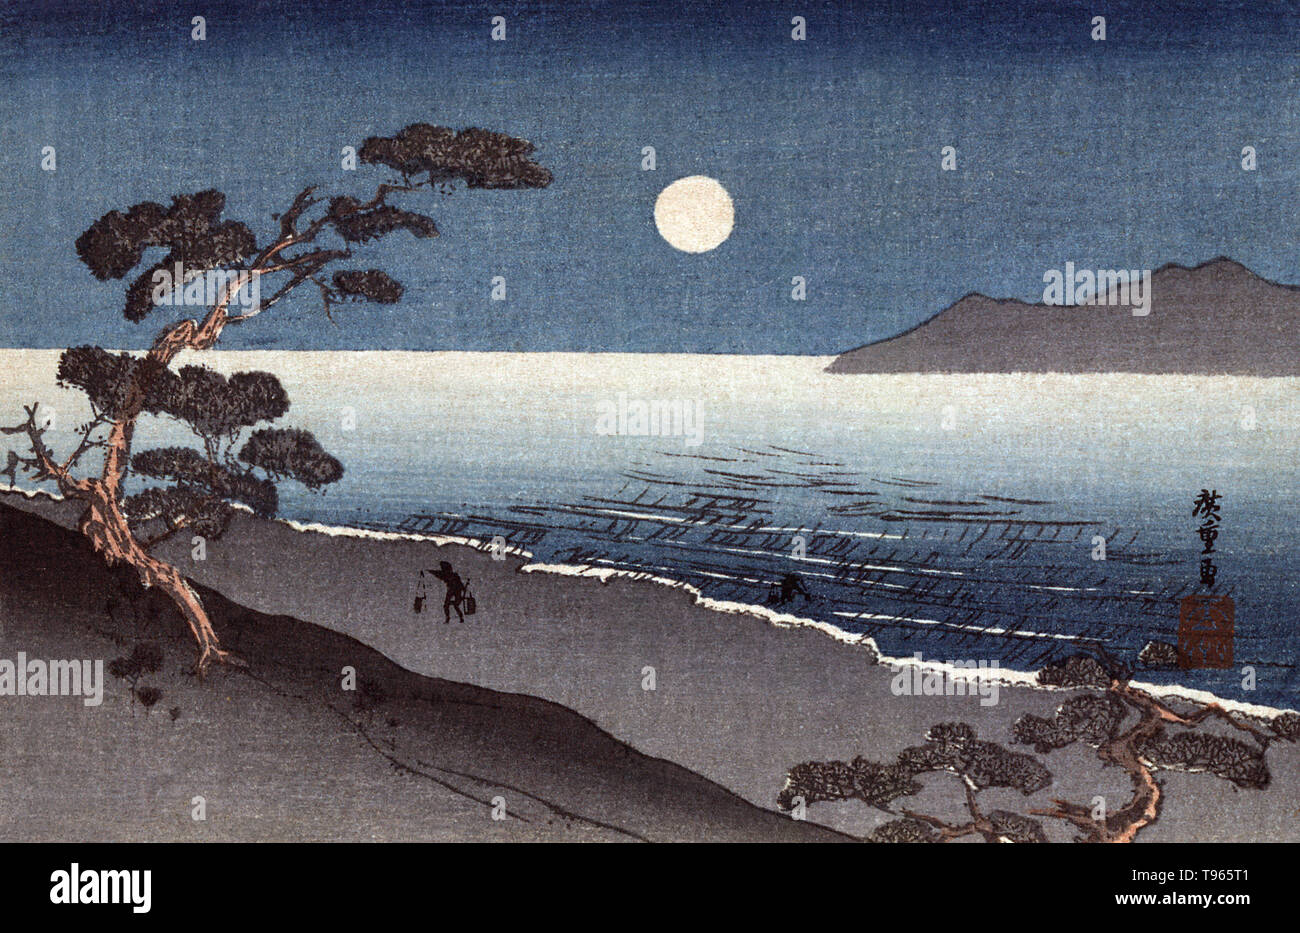 A fairy moon and a lonely shore. Shows a man with a shoulder pole walking along a moonlite shore. The term fairy moon (black moon) refers to an additional new moon that appears in a month or in a season. It may also refer to the absence of a full moon or of a new moon in a month. Since ancient times the Japanese have contemplated the combination of snow, flowers, moon, and the beauties of nature. Stock Photo